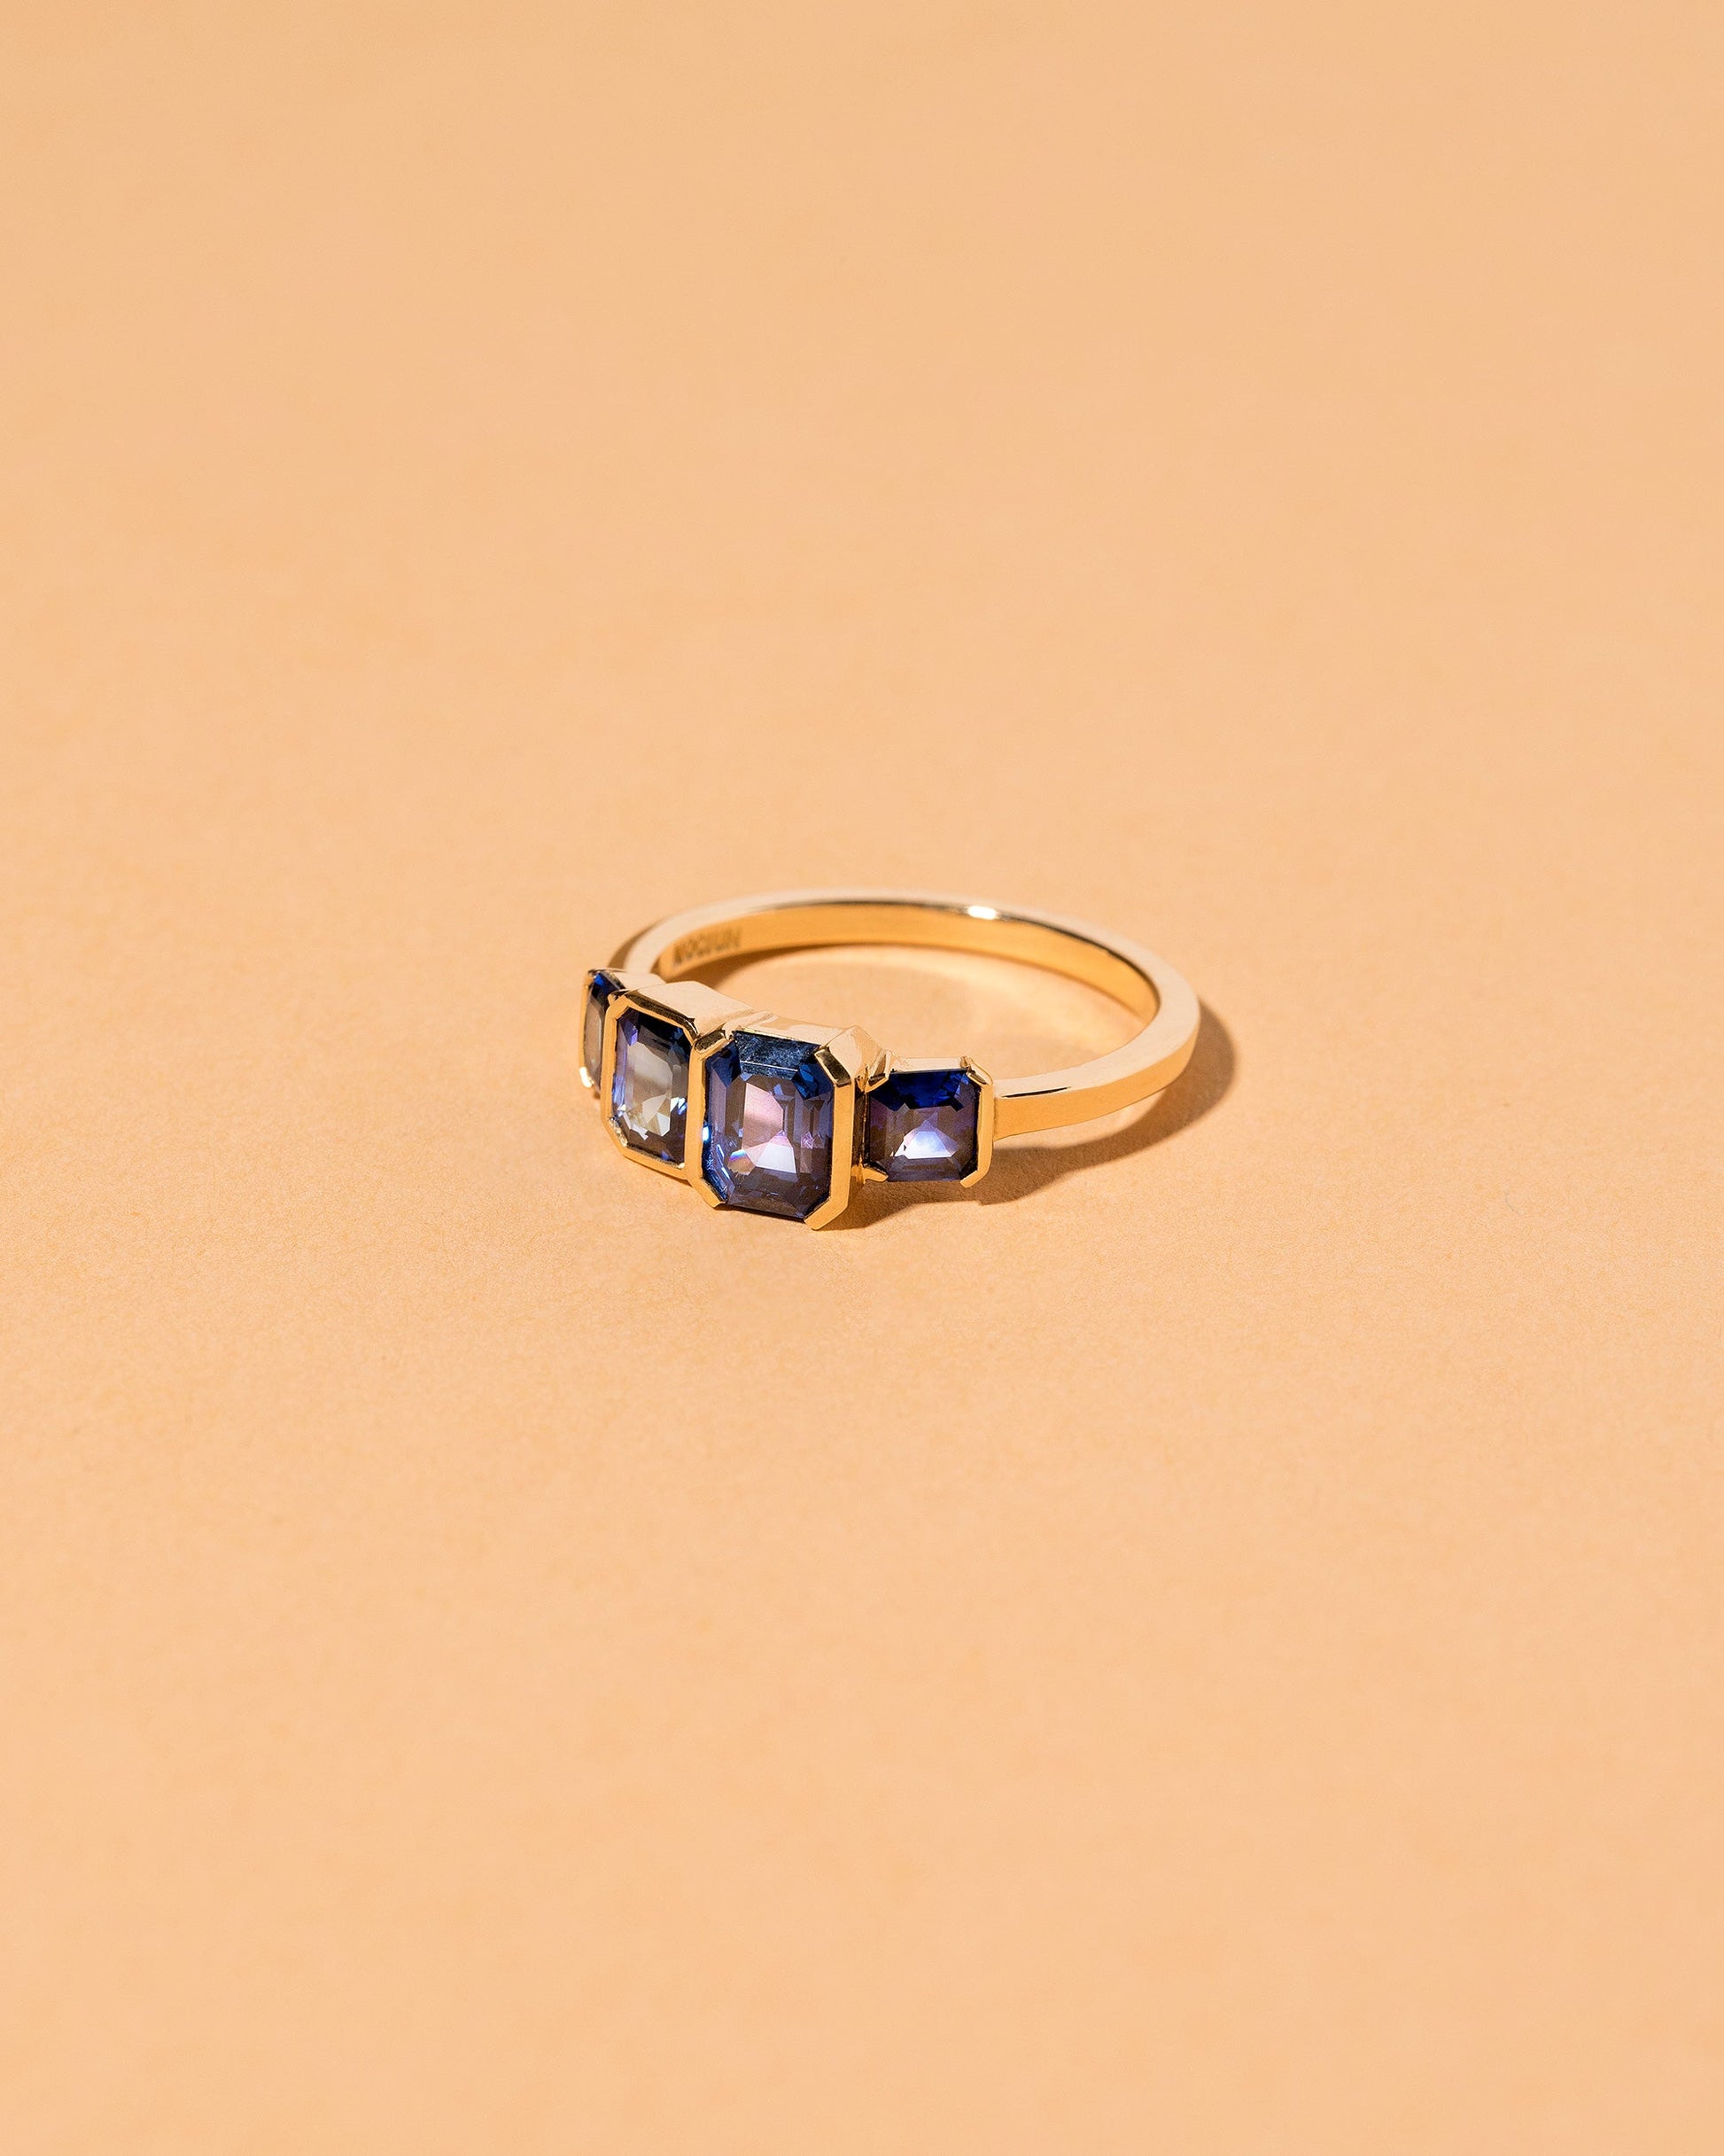  Geometric Sapphire Line Cluster Ring on light color background.